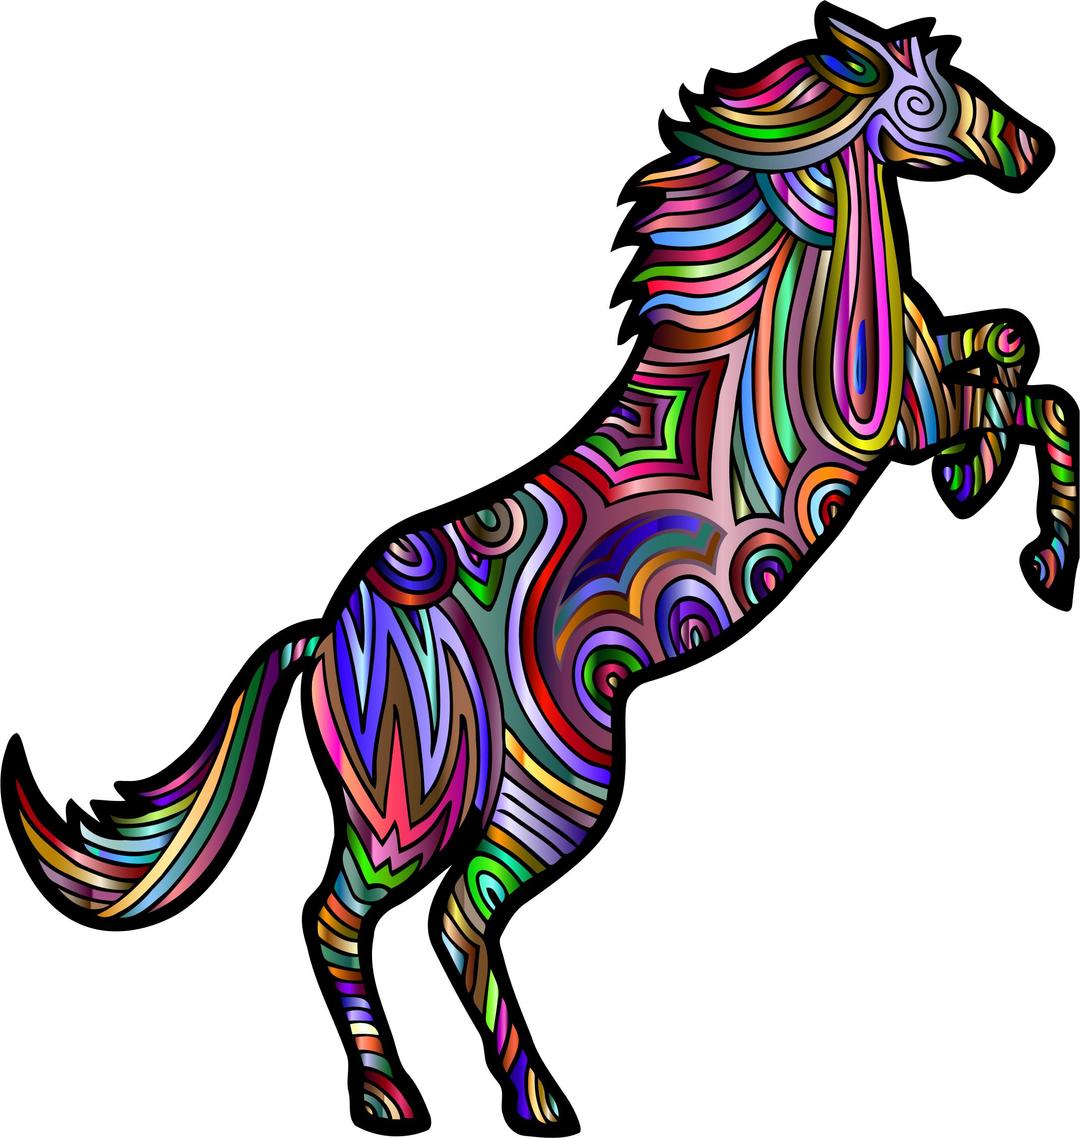 Chromatic Stylized Horse 2 png transparent